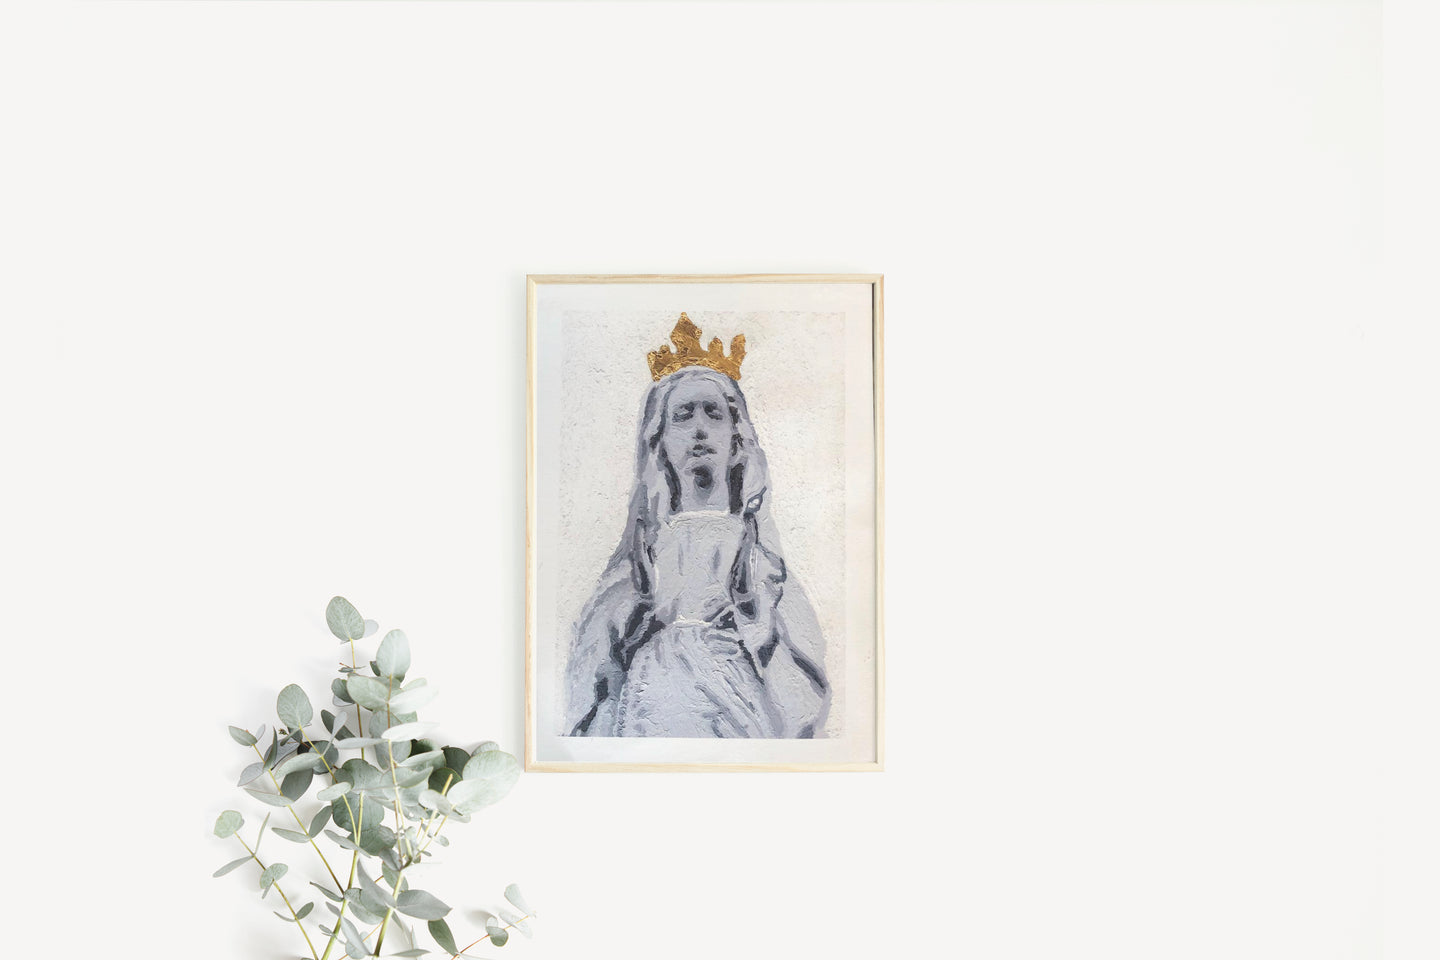 Our Lady of Knock, Ireland (with gold leaf crown)